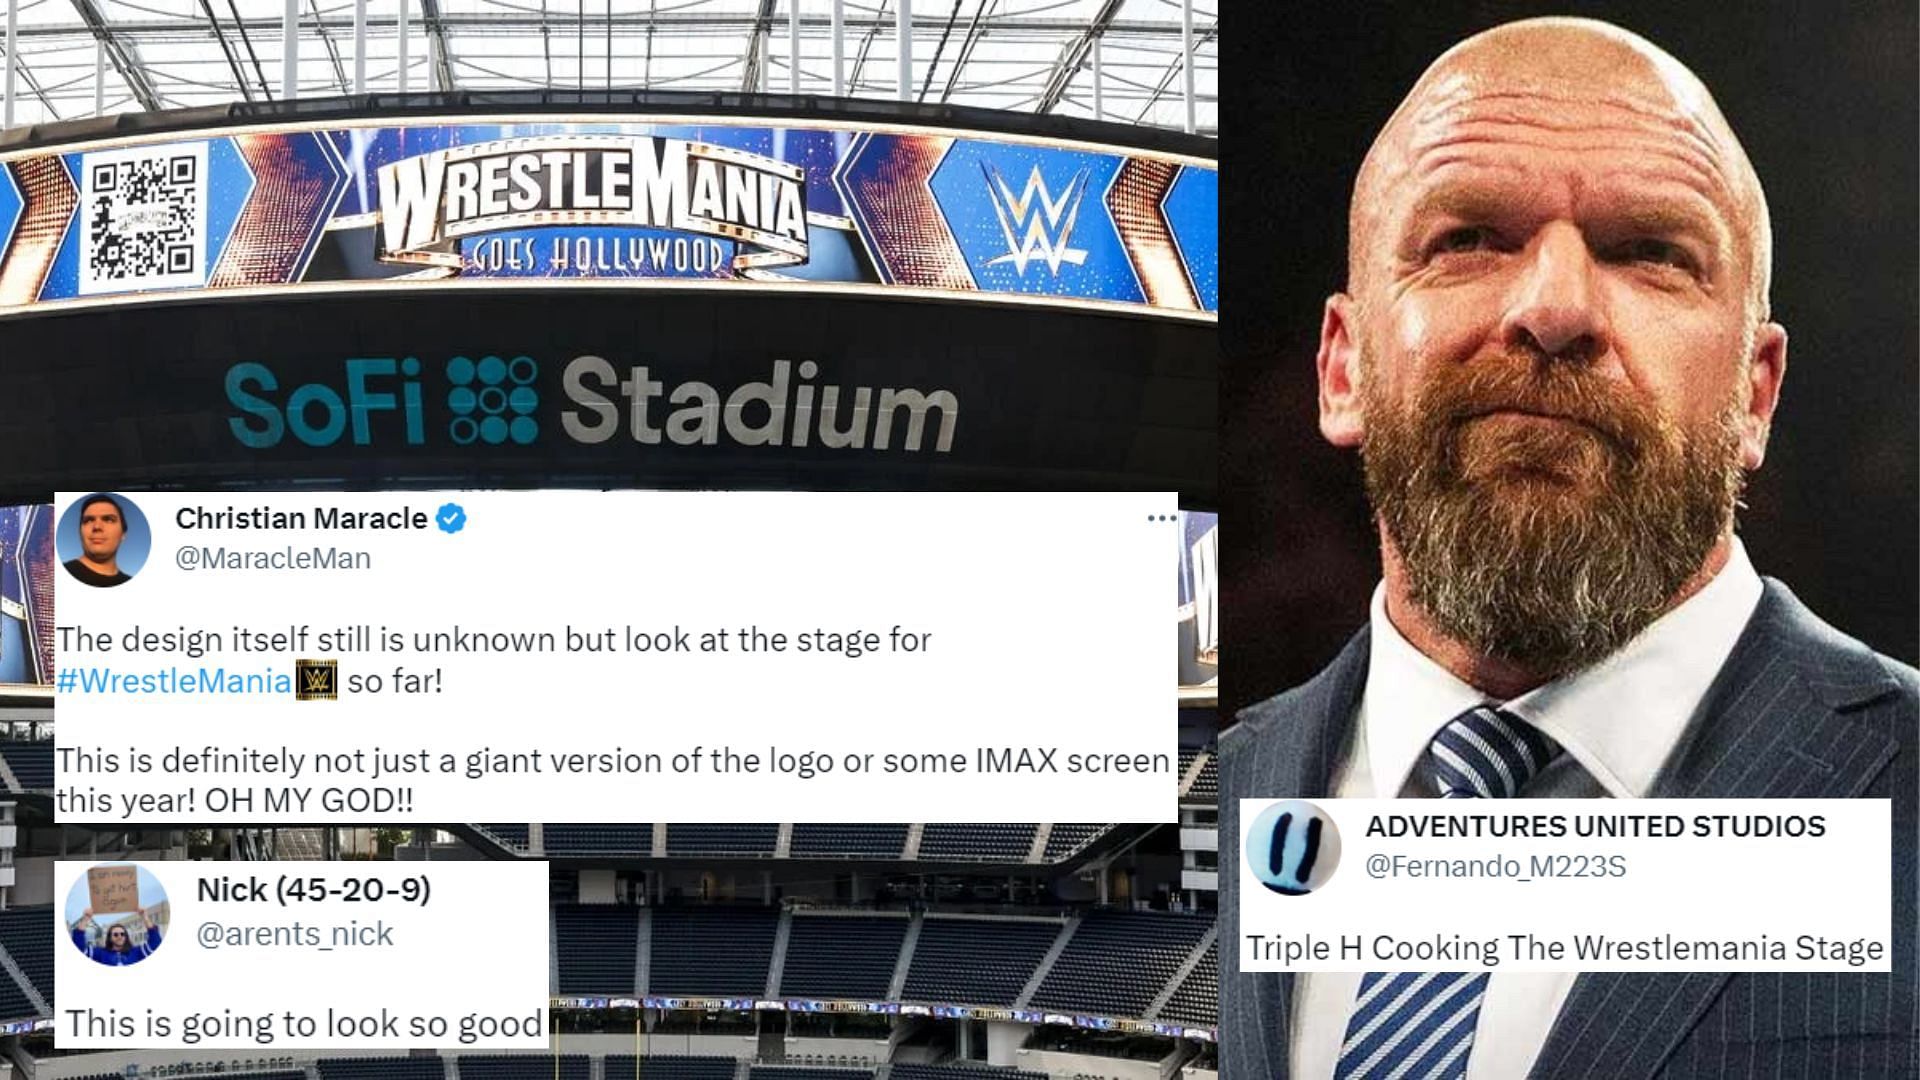 "Trips got them building an entire city" - Twitter buzzing at latest photo of WWE WrestleMania 39 stage construction